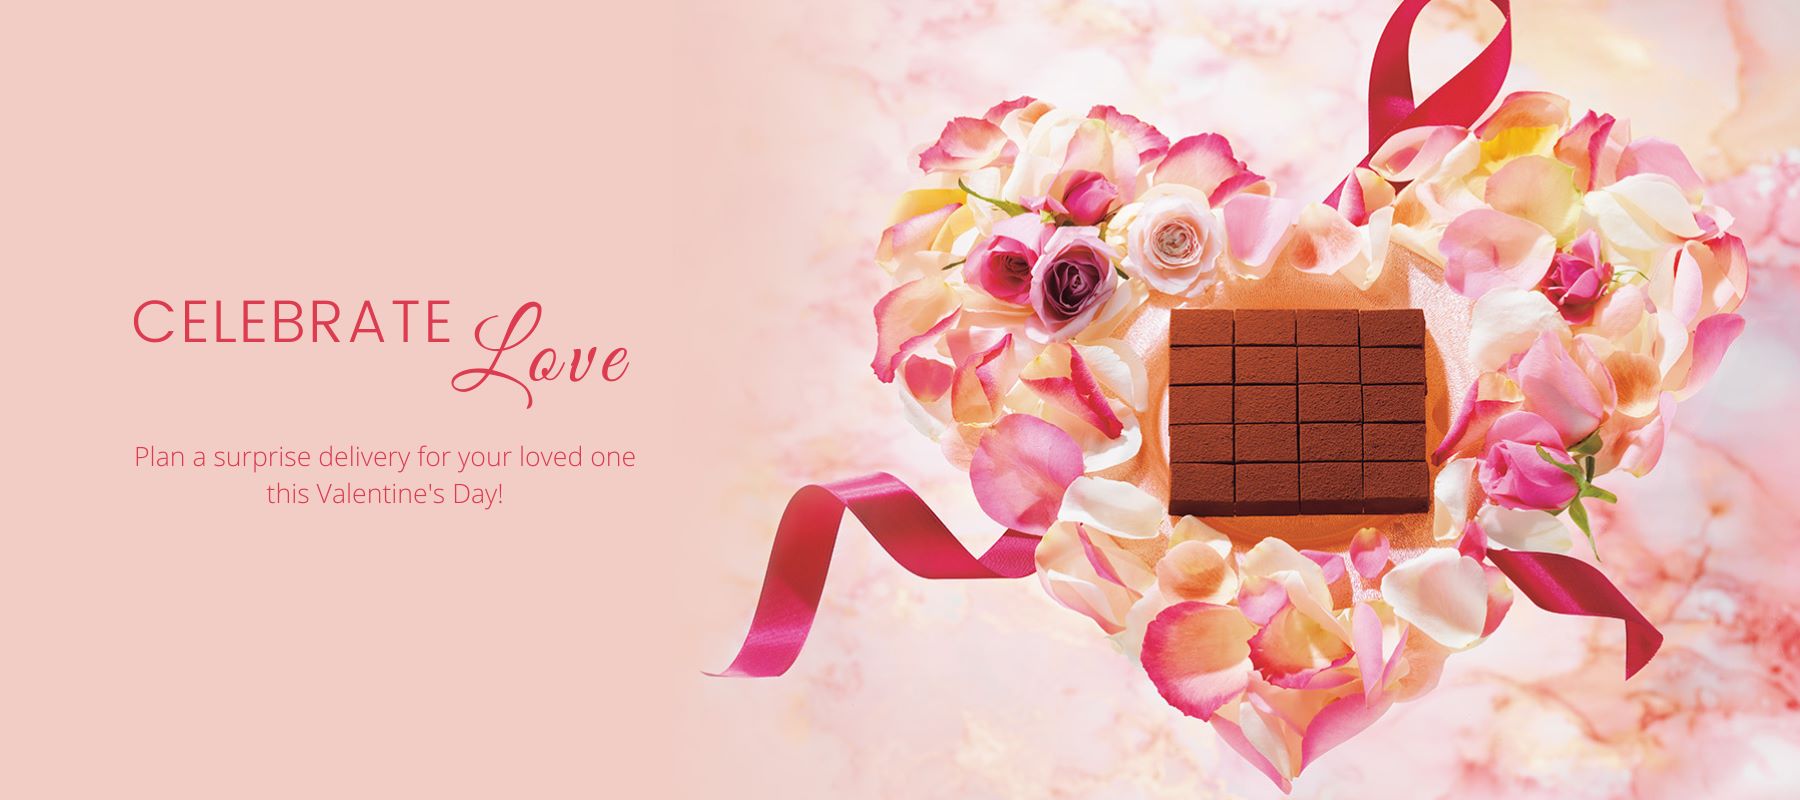 6 Heartwarming Valentine's Day Gifts Perfect for Chocolate Lovers